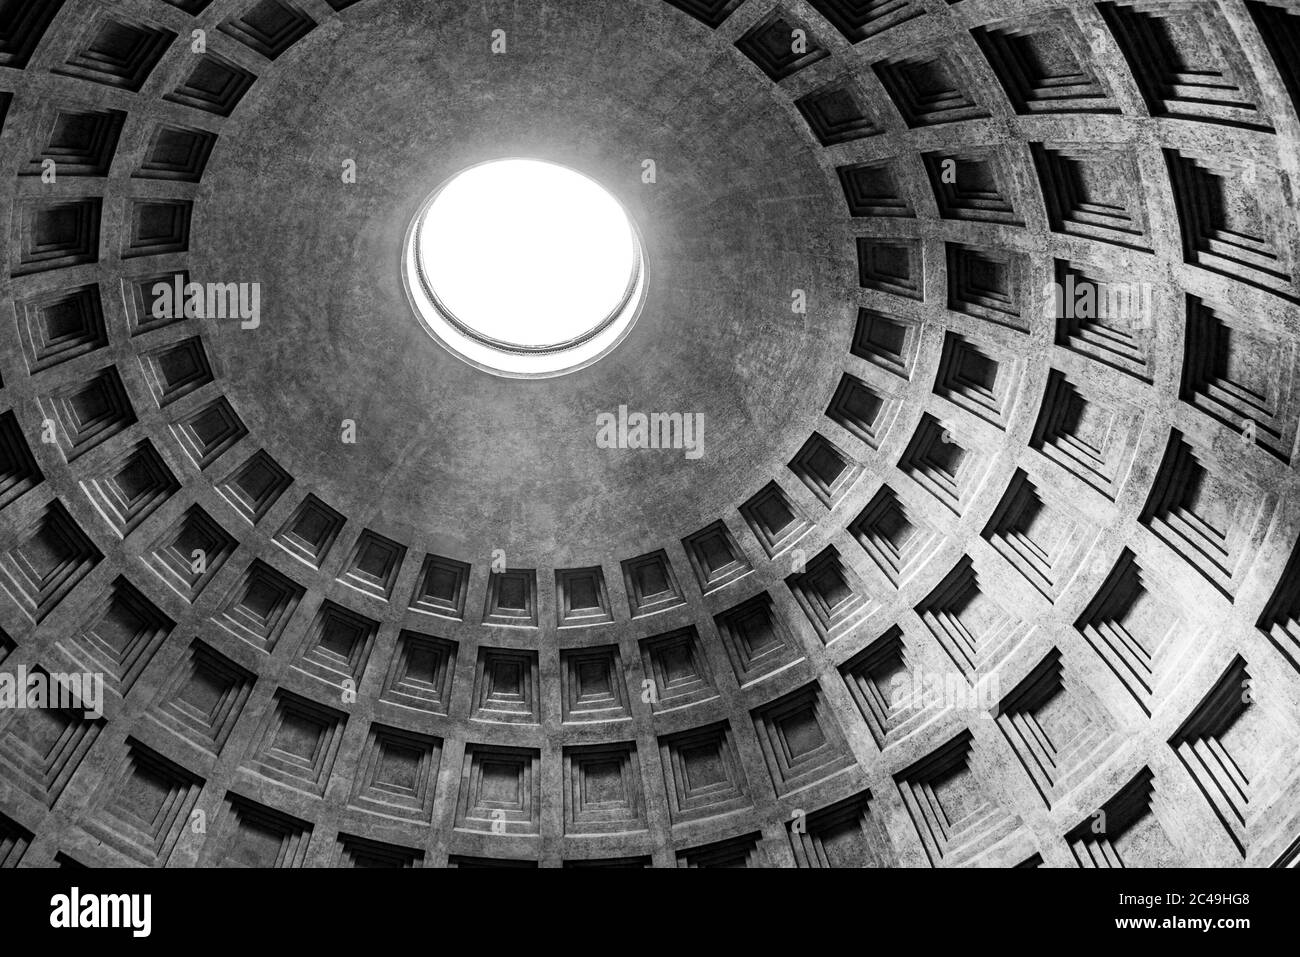 Monumental ceiling of Pantheon - church and former Roman temple, Rome, Italy. Black and white image. Stock Photo